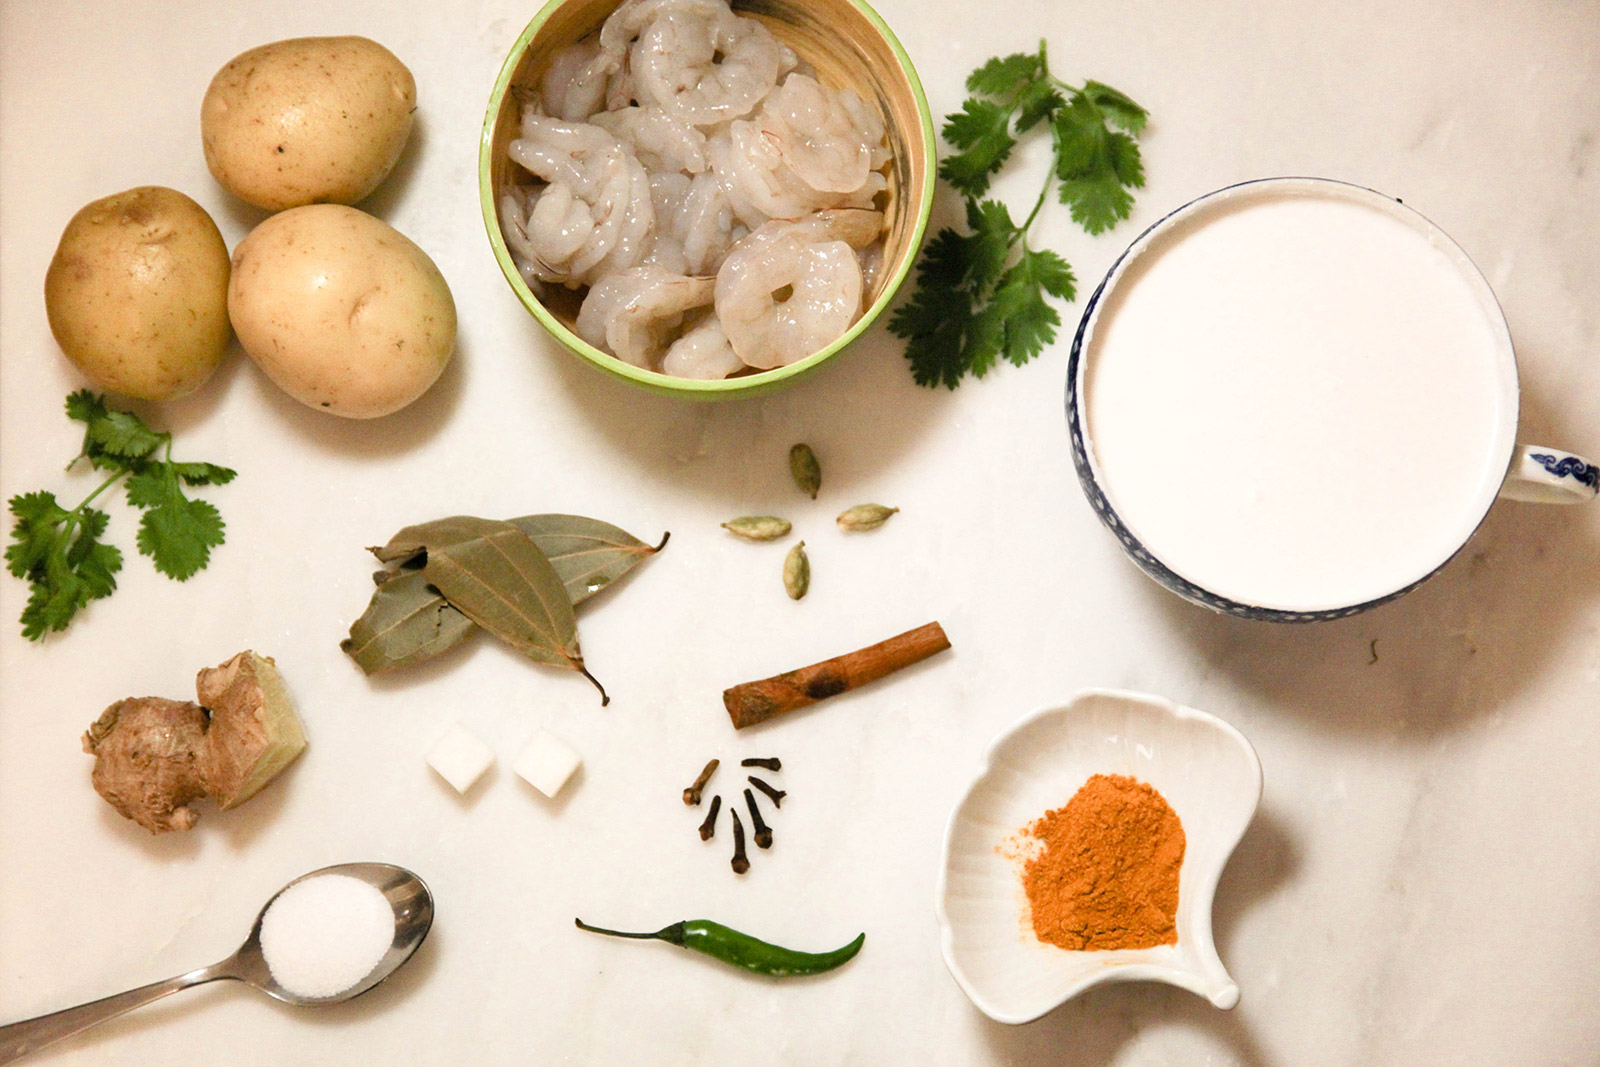 malai-curry-ingredients